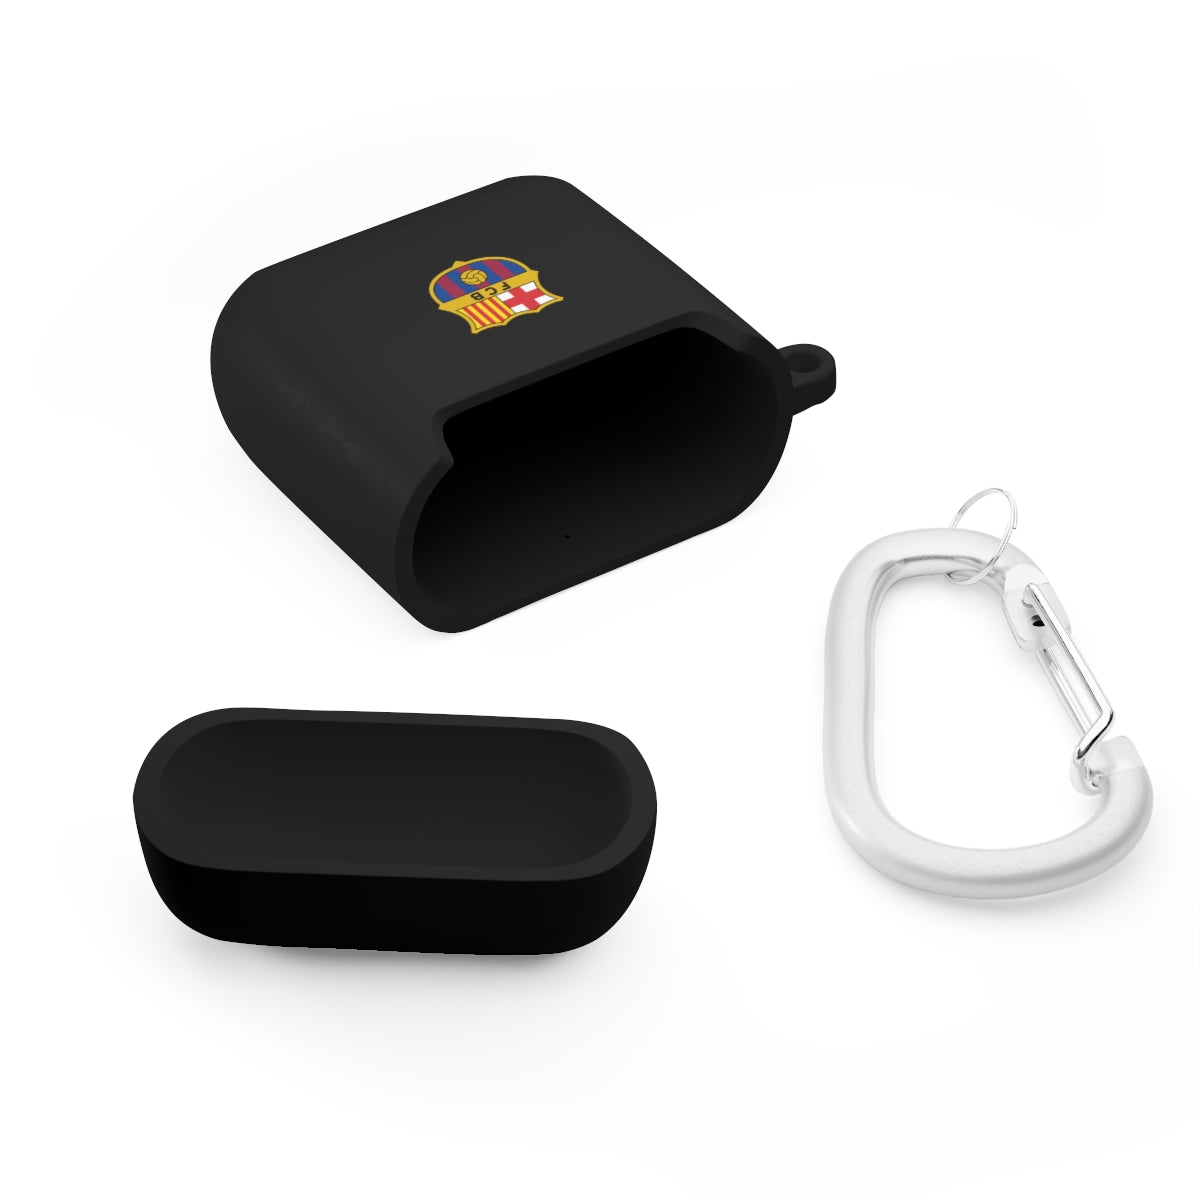 Barcelona AirPods and AirPods Pro Case Cover